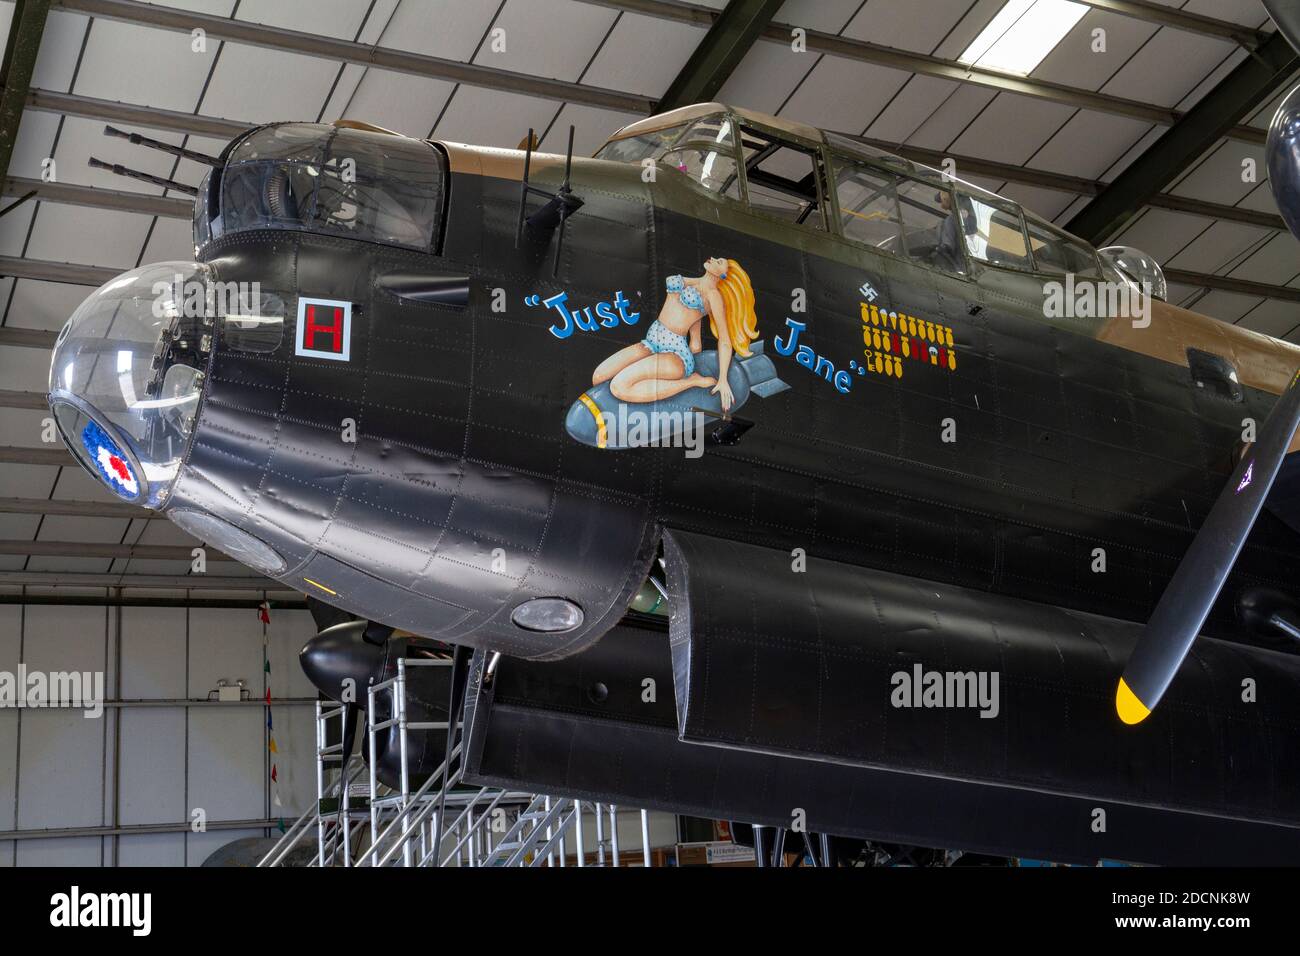 Nose art on the Lancaster bomber (NX611) from WWII, 'Just Jane', Lincolnshire Aviation Heritage Museum, East Kirkby, Spilsby, Lincs, UK. Stock Photo